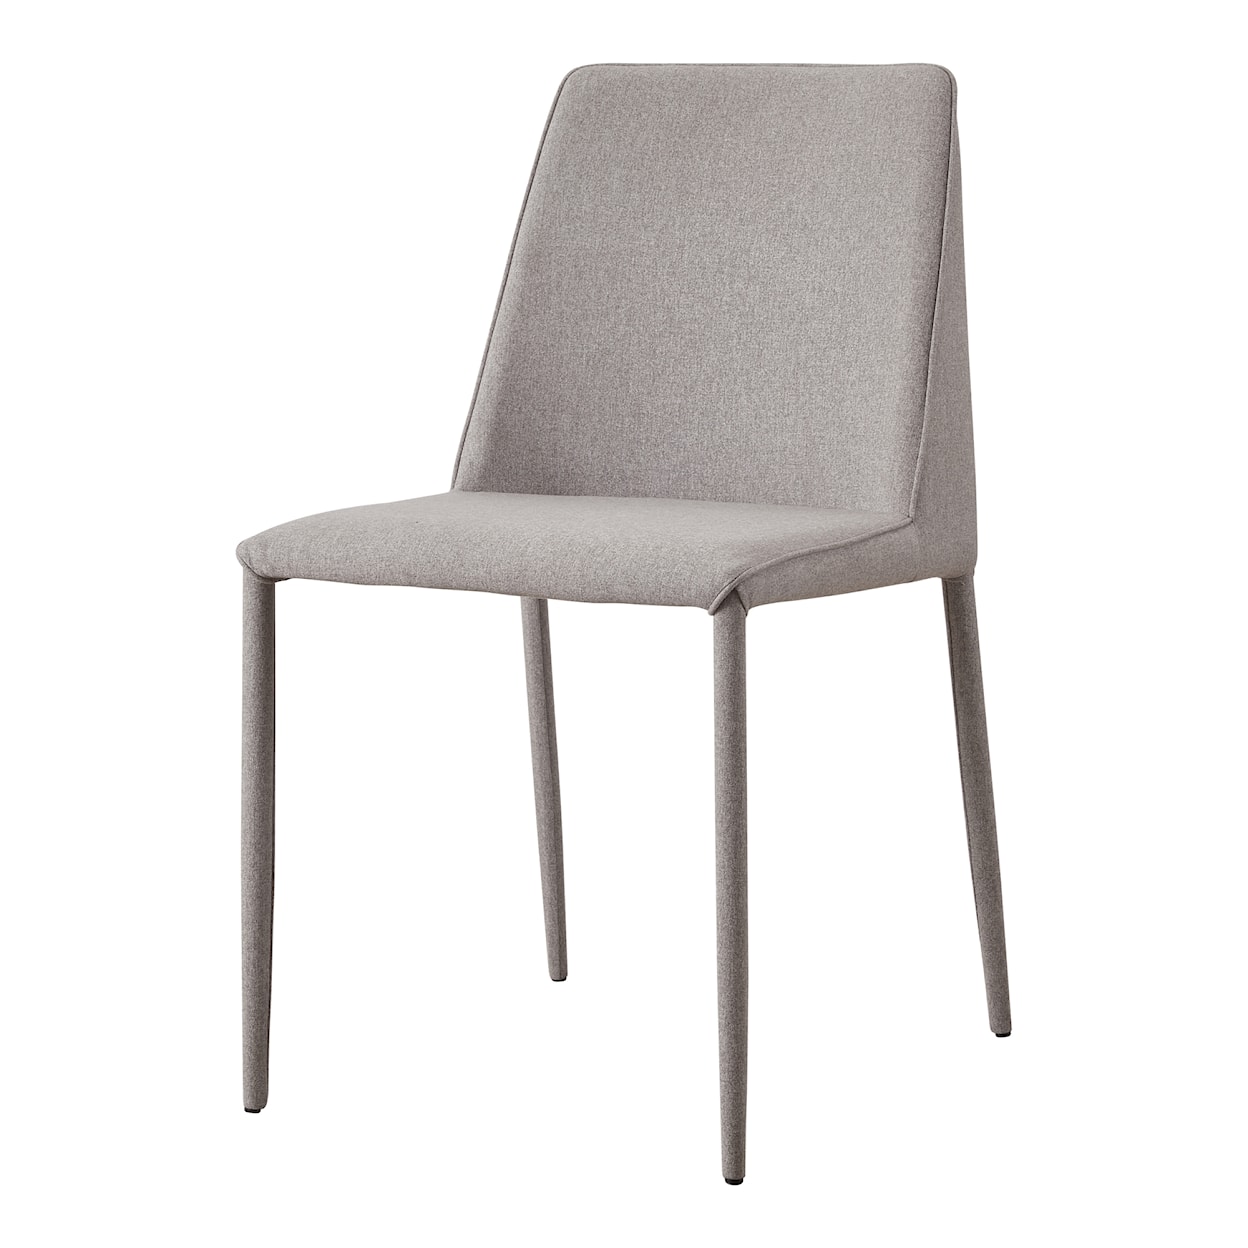 Moe's Home Collection Nora Light Grey Polyester Dining Chair